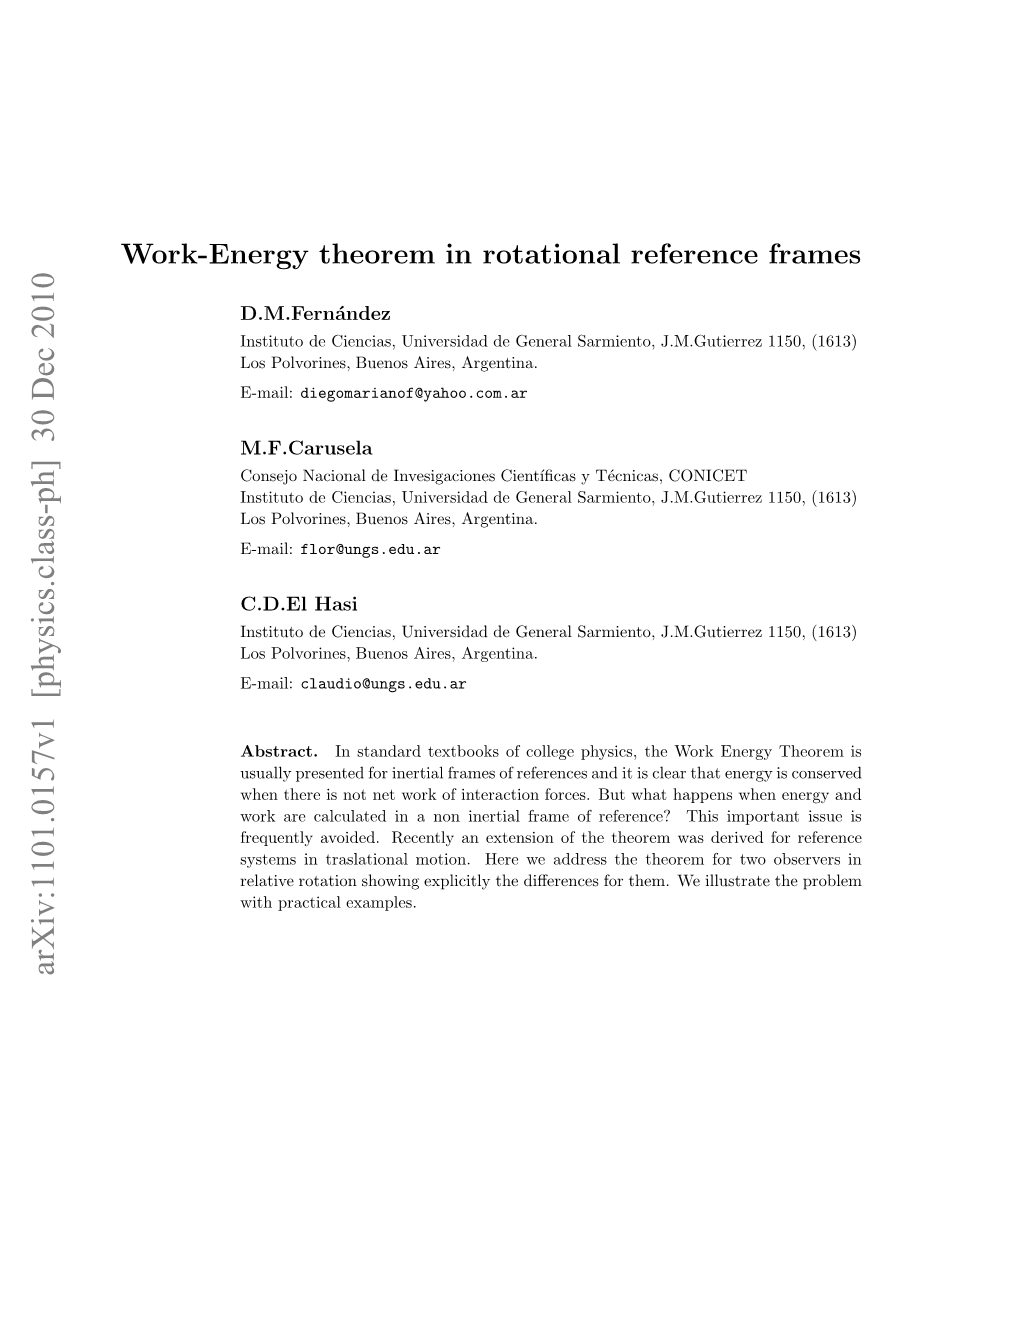 Work-Energy Theorem in Rotational Reference Frames 2